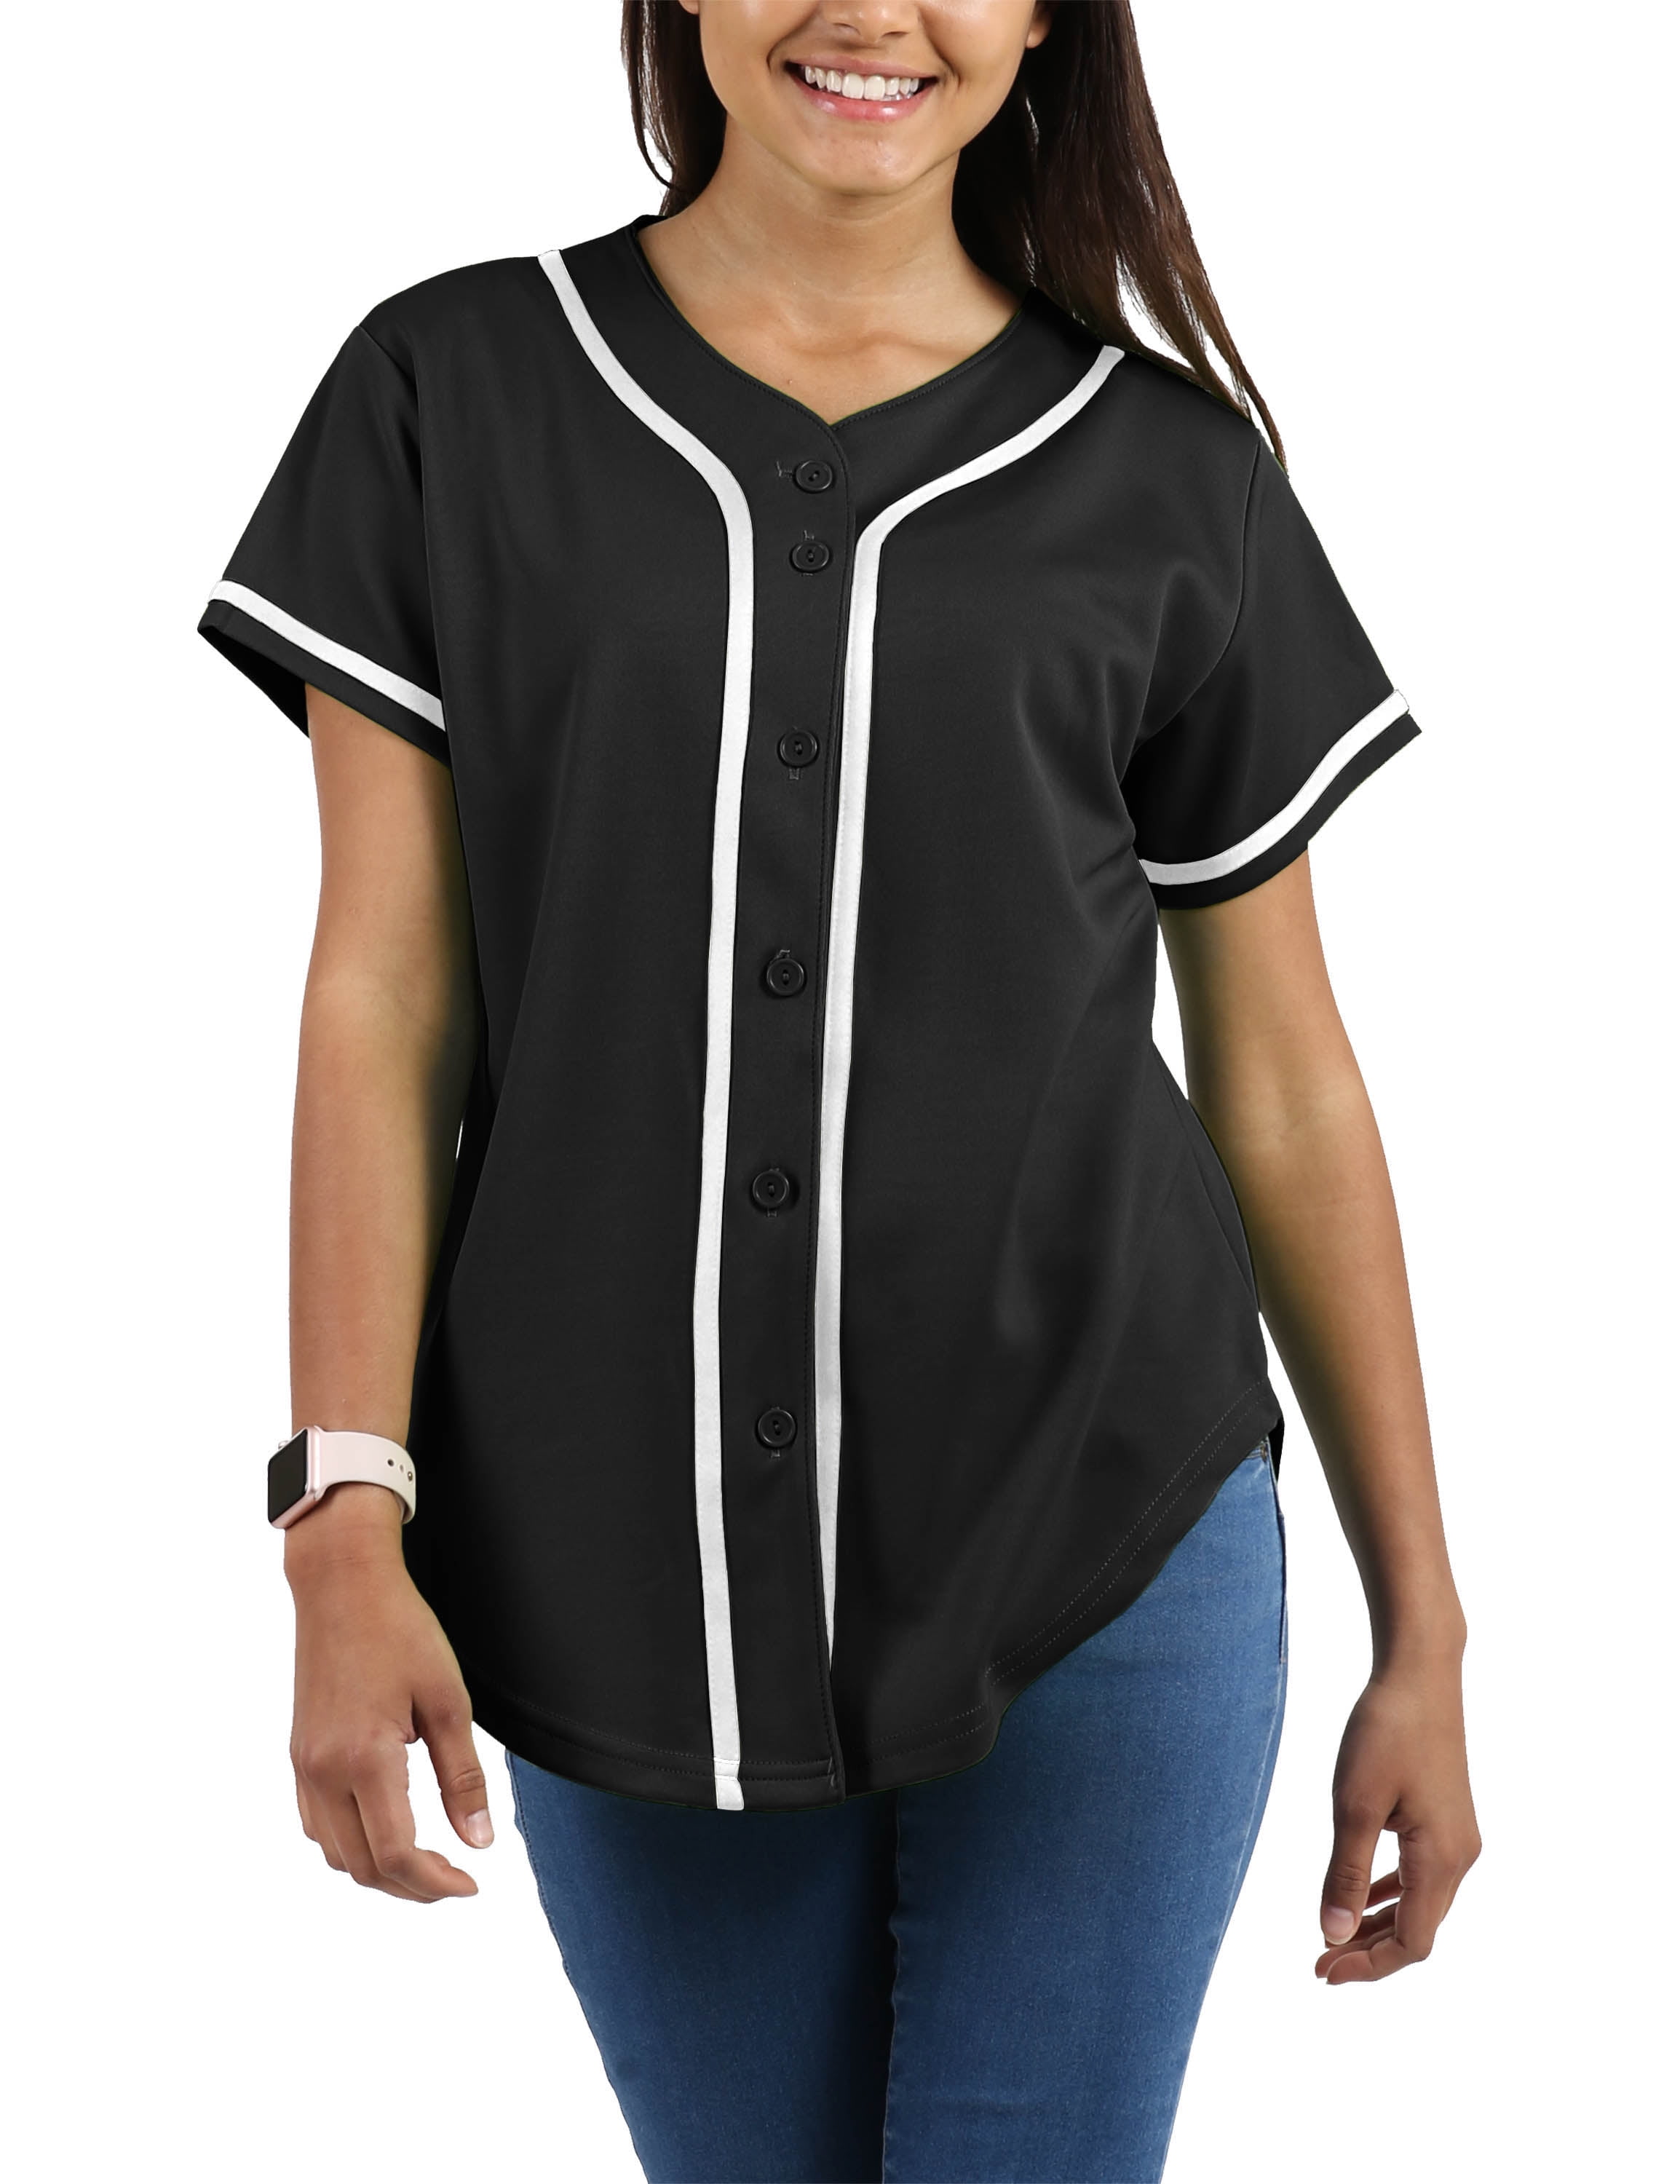 kxybz Unisex Bel Air 23 Baseball Jersey? 90s Theme Party Hip Hop Fashion  Blouses for Birthday Party, Club and Pub